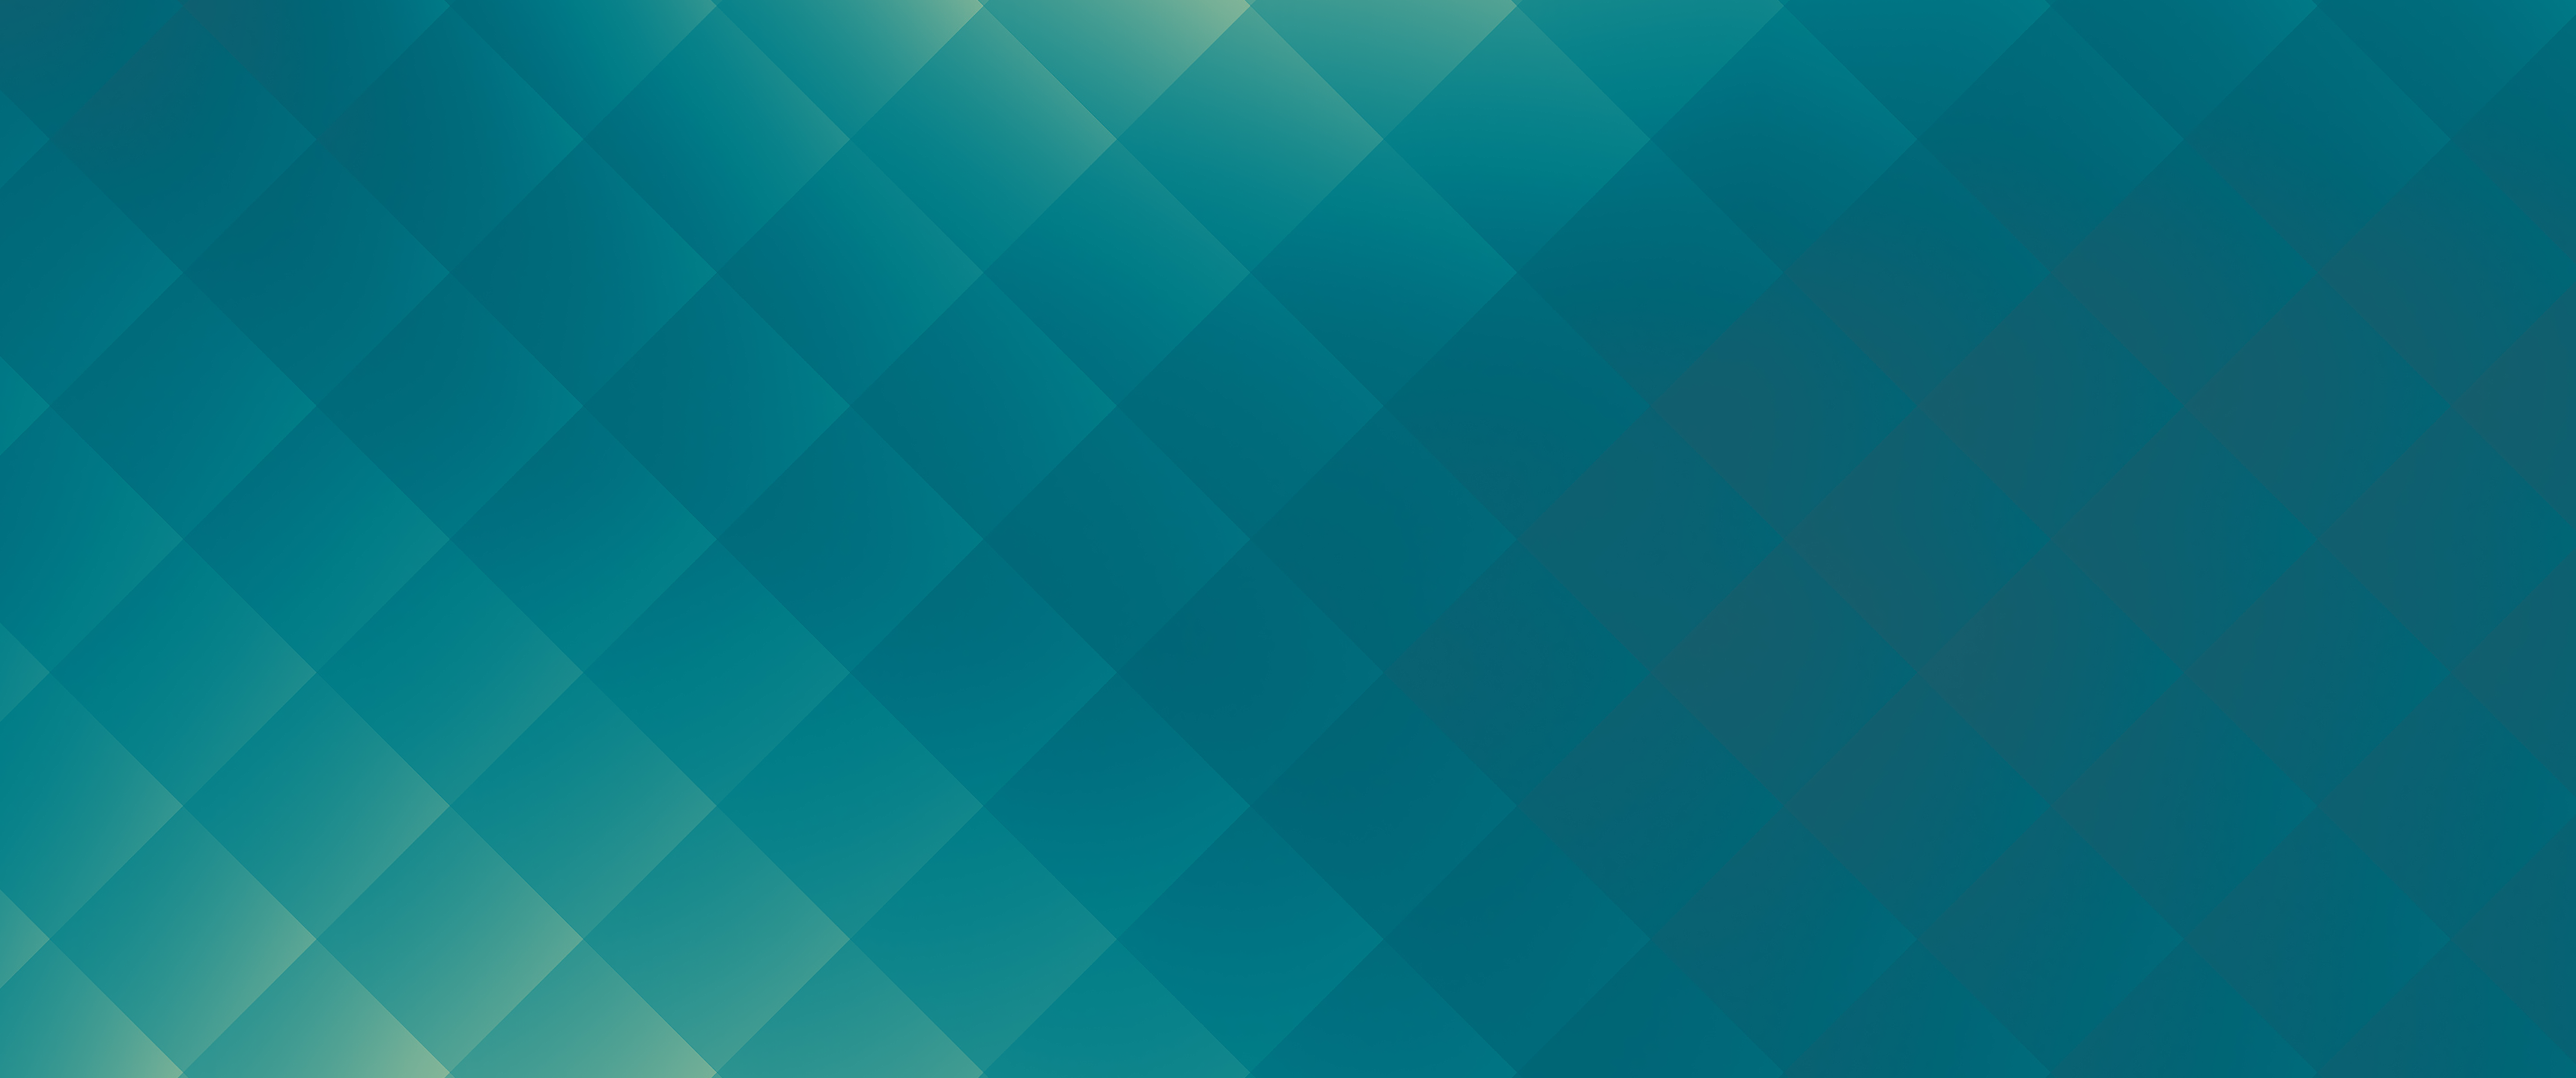 General 3440x1440 abstract blue gradient texture pattern cyan